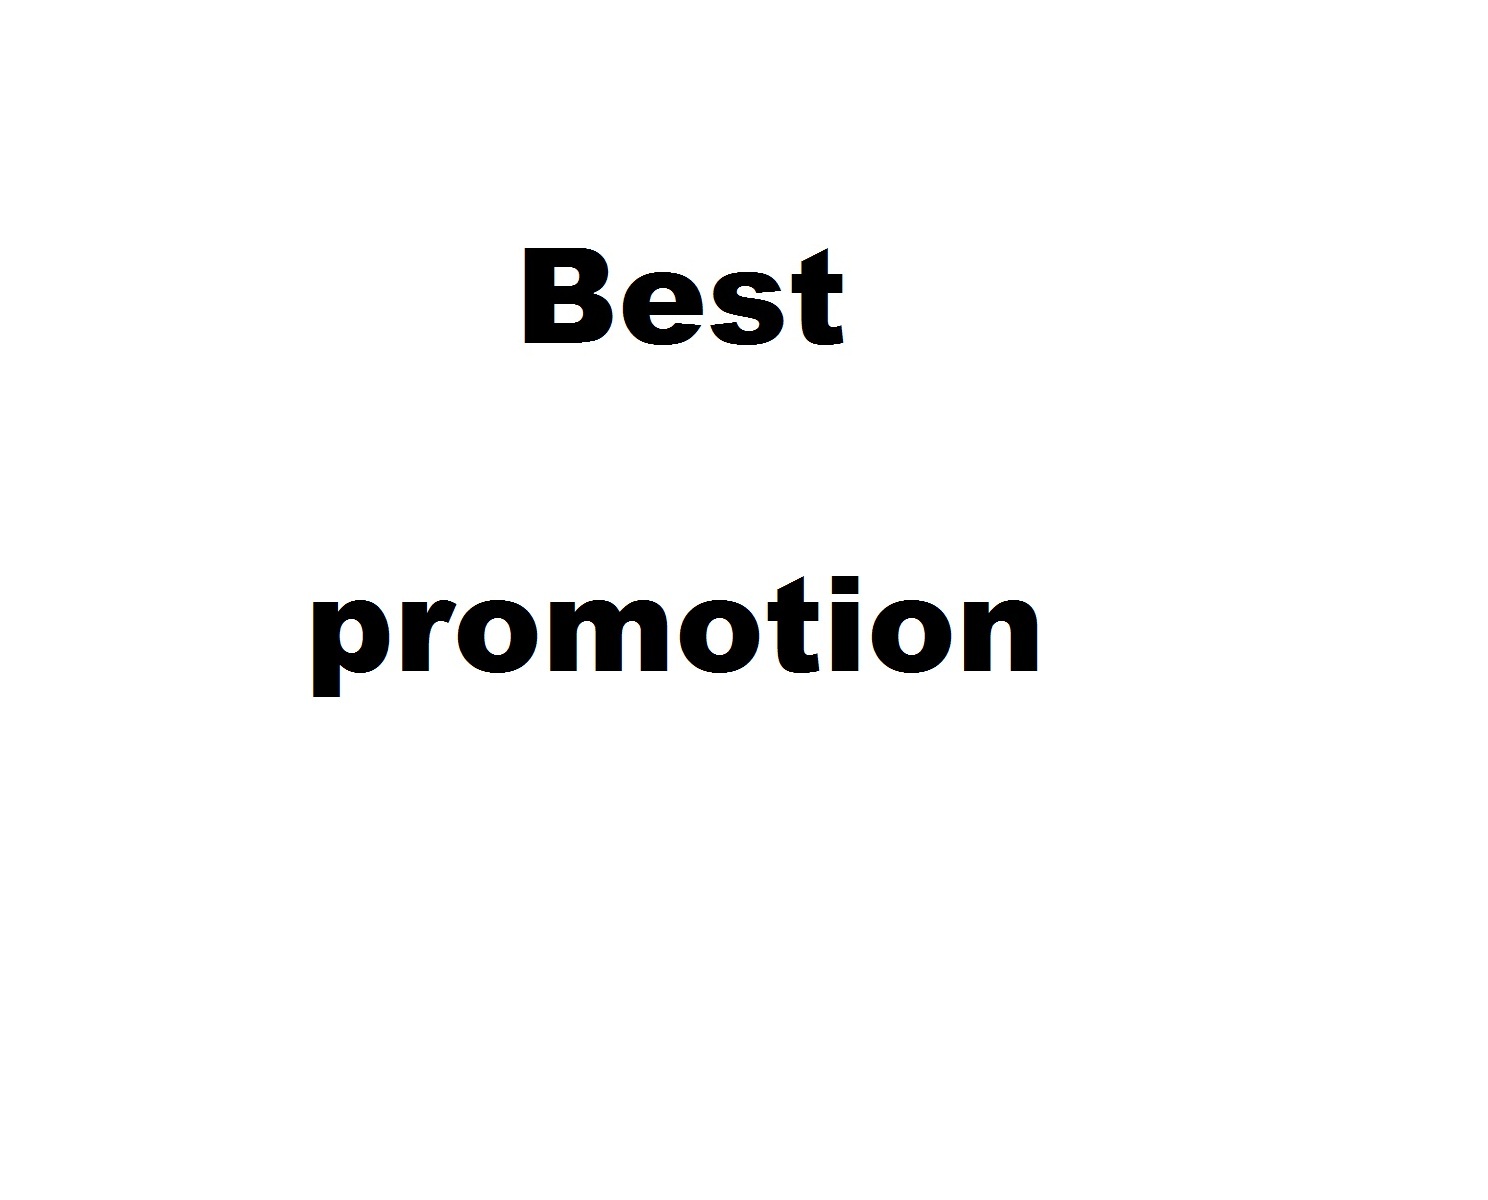  mustc promotion for your track or playlist 